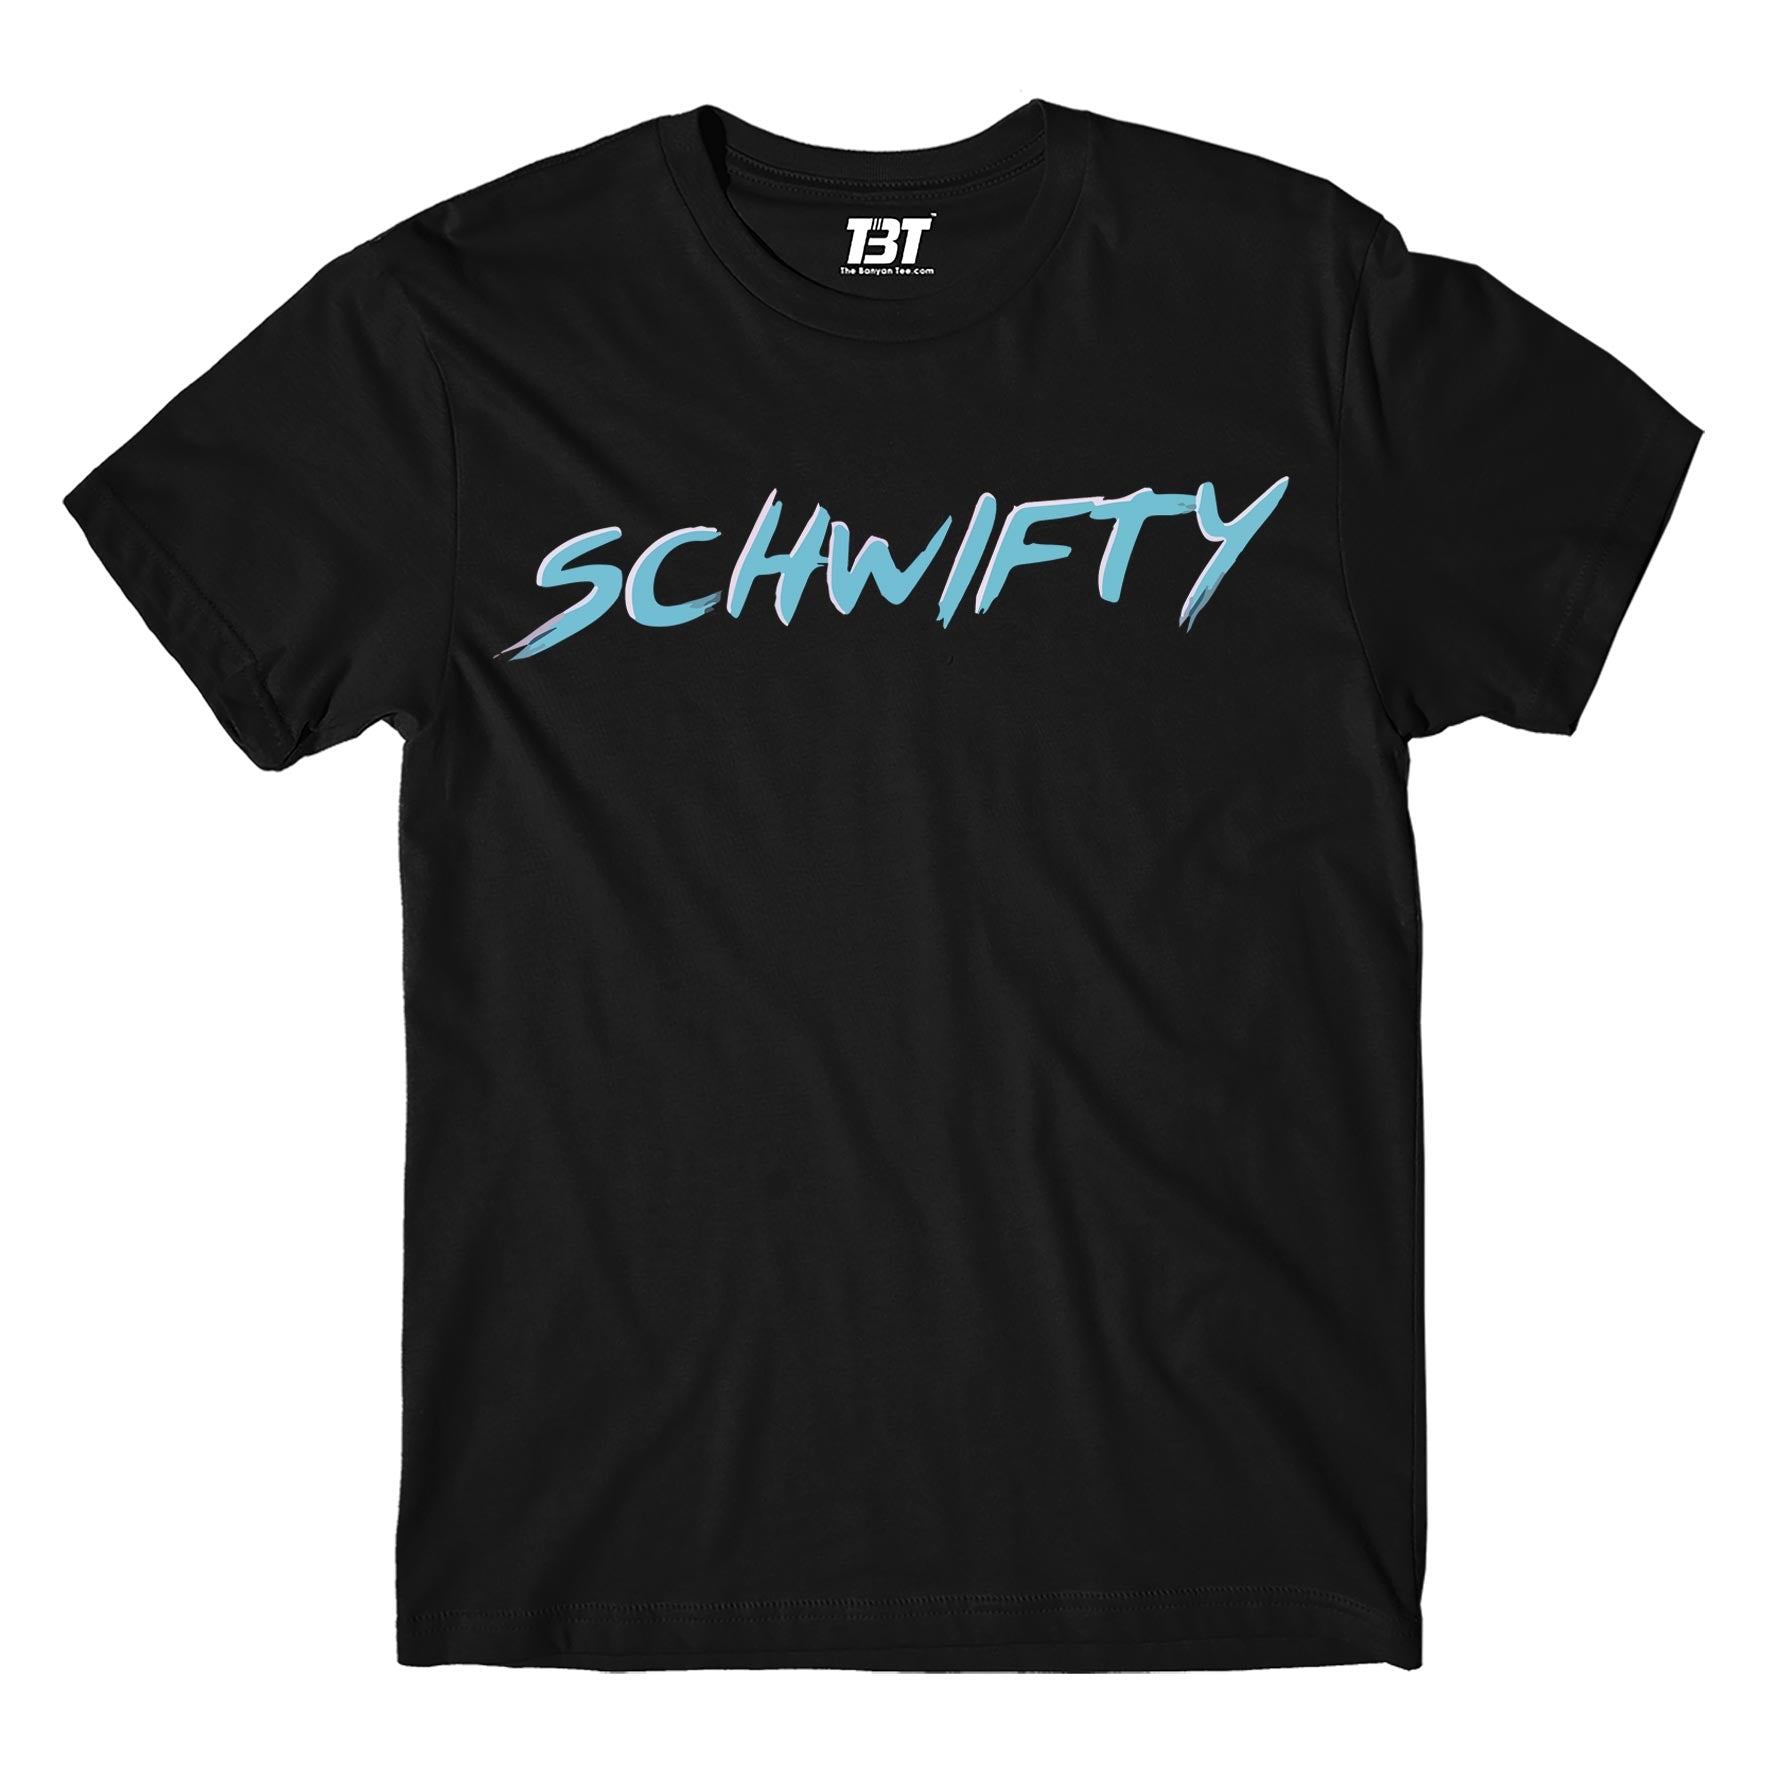 rick and morty schwifty t-shirt buy online india the banyan tee tbt men women girls boys unisex black rick and morty online summer beth mr meeseeks jerry quote vector art clothing accessories merchandise